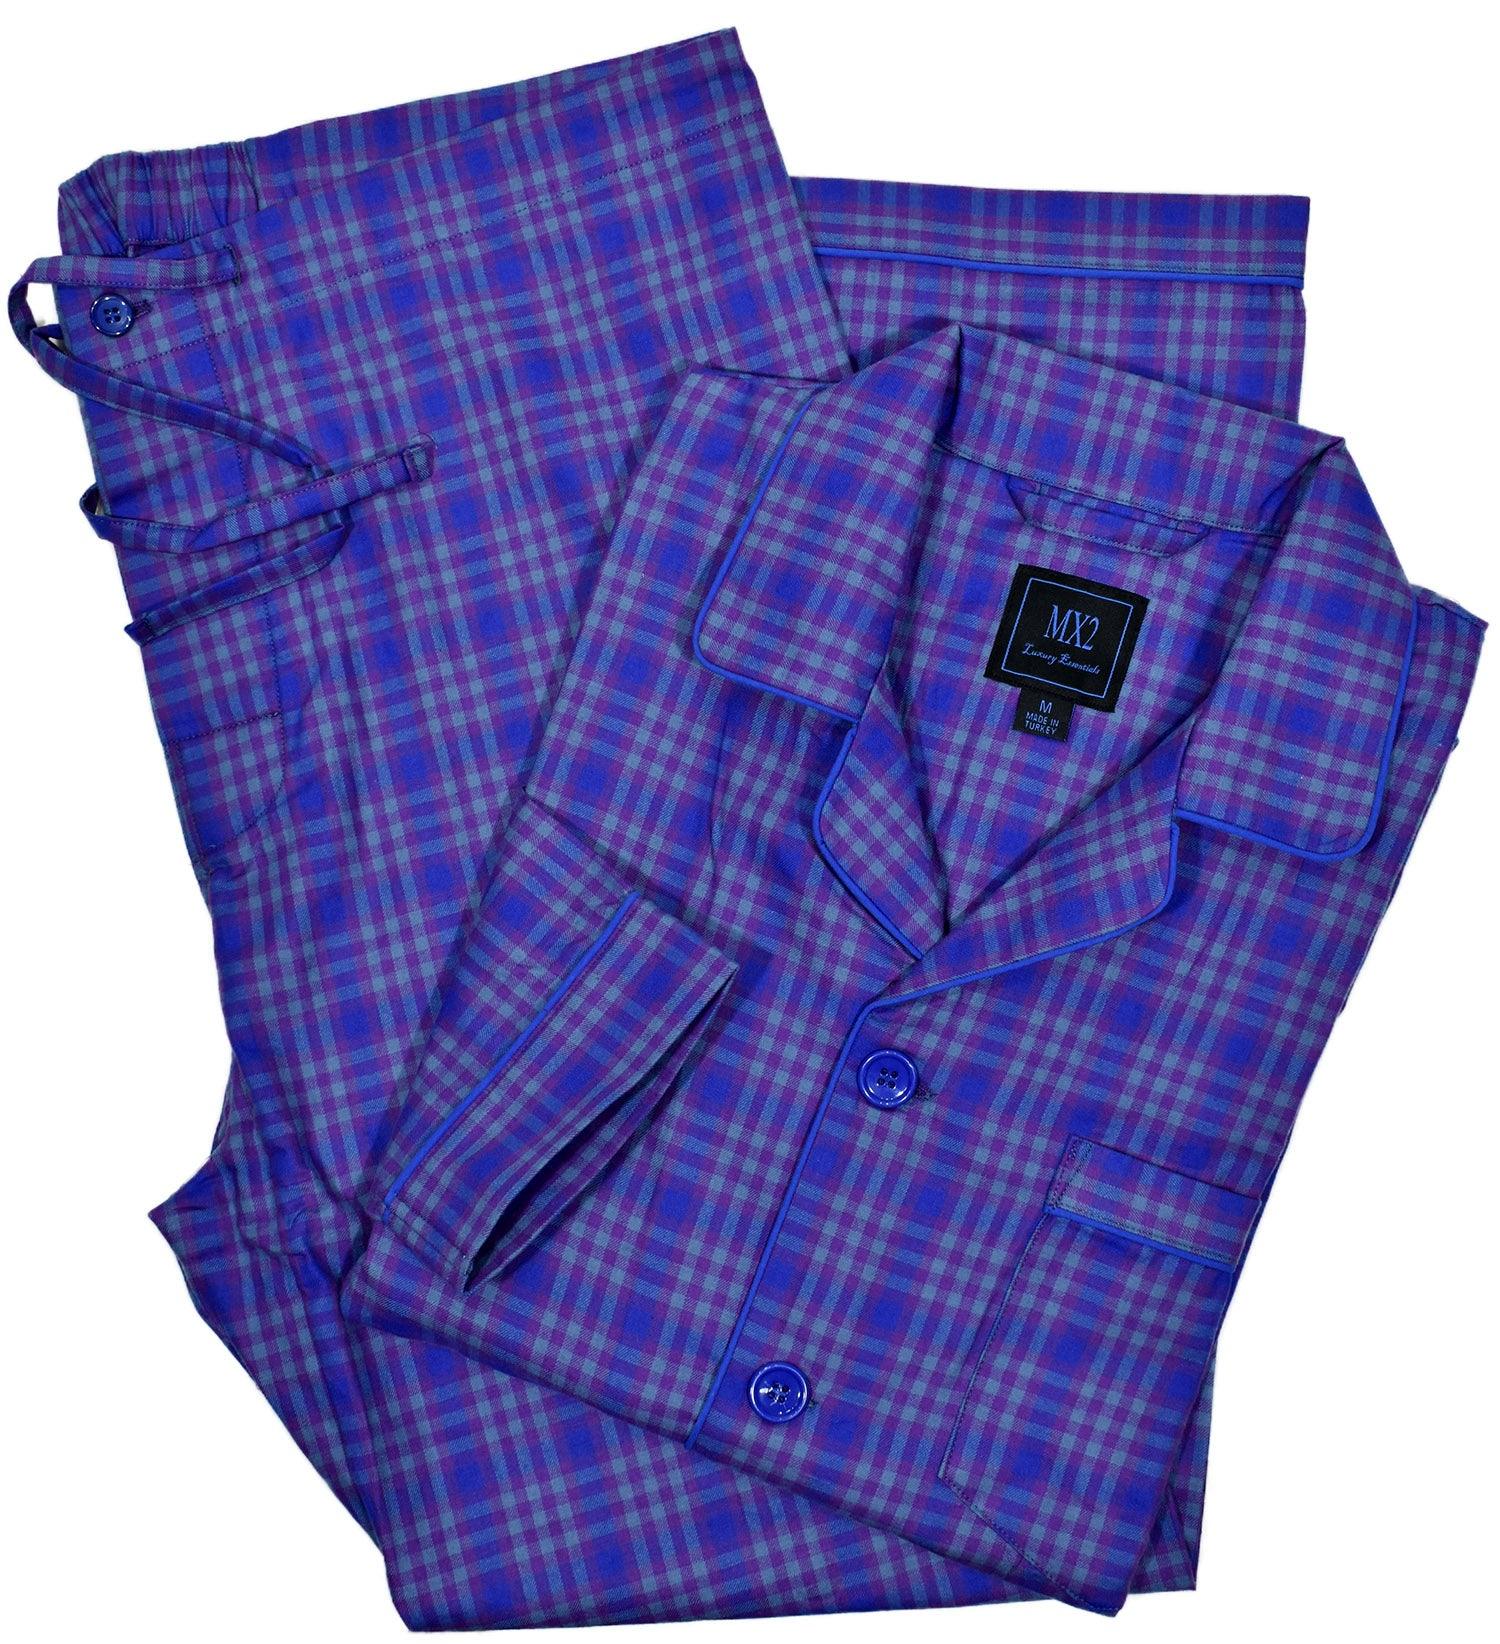 Soft cotton woven fabric. Traditional fashion pattern. Blue and plum coloration. Classic coat top with pocket, button closure and edge piping. Classic draw string pant with a touch of elastic for comfort. Classic fit.  By Marcello Sport